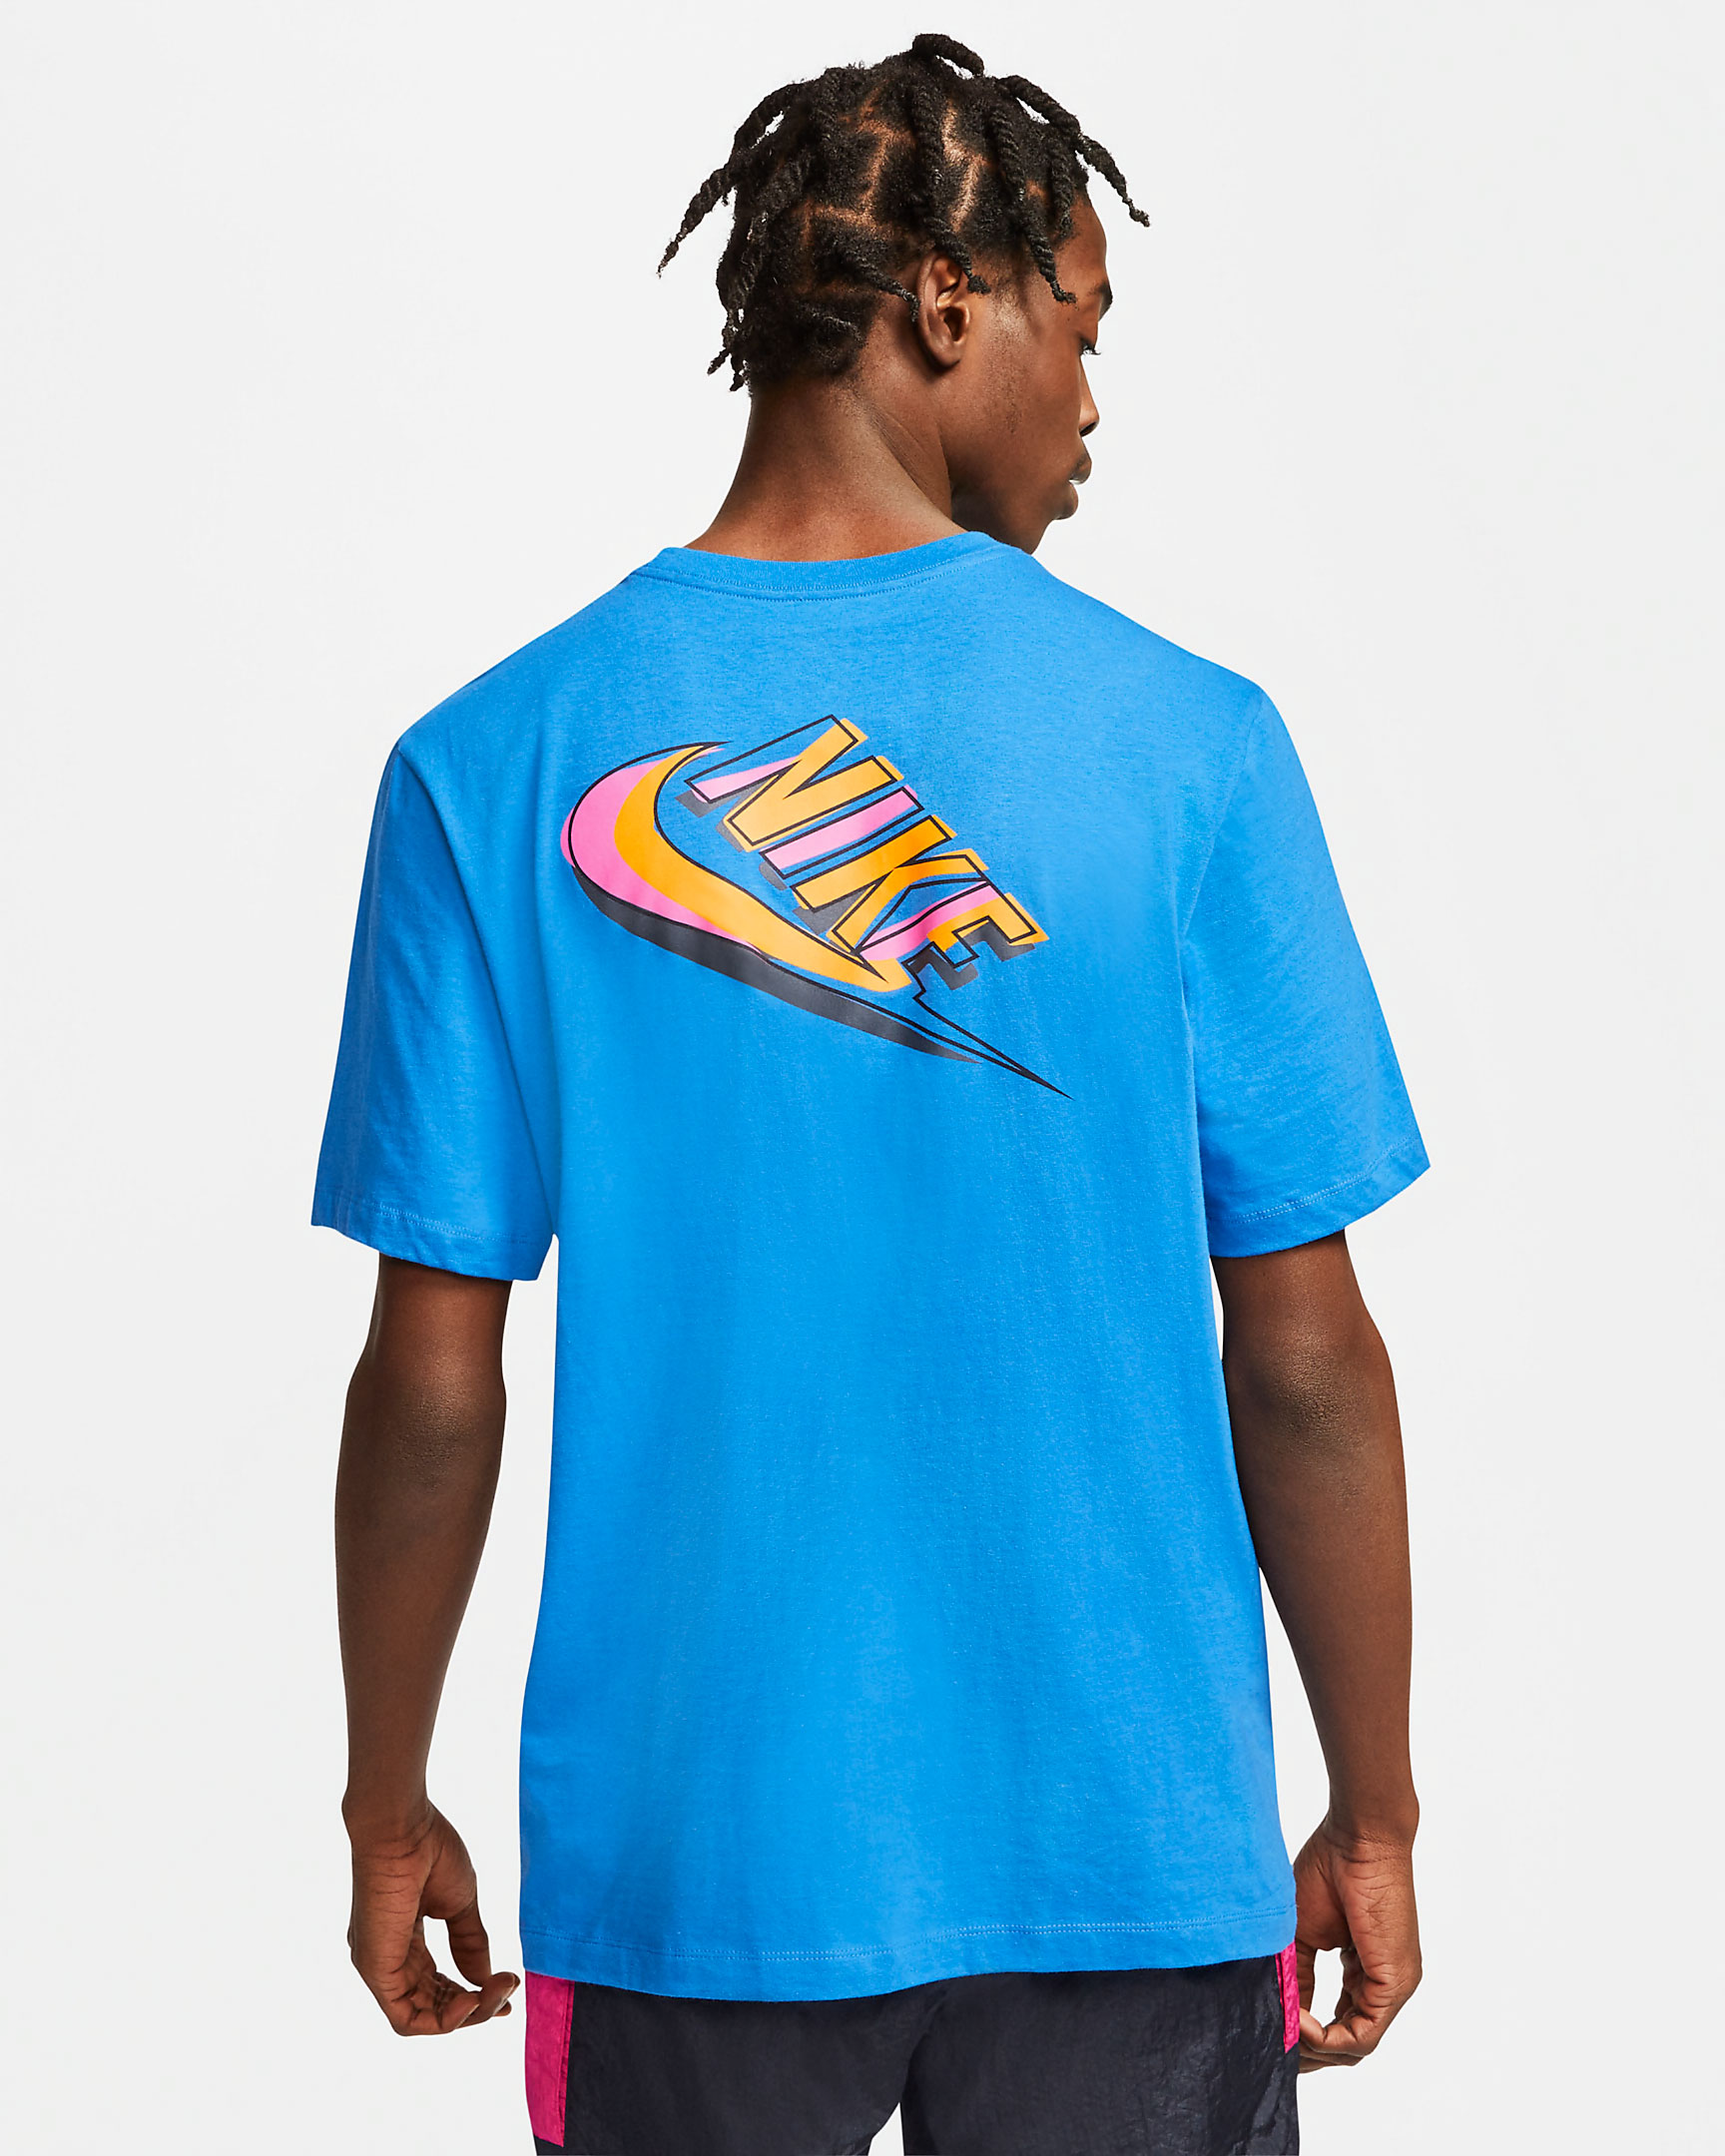 nike shirt pink and blue